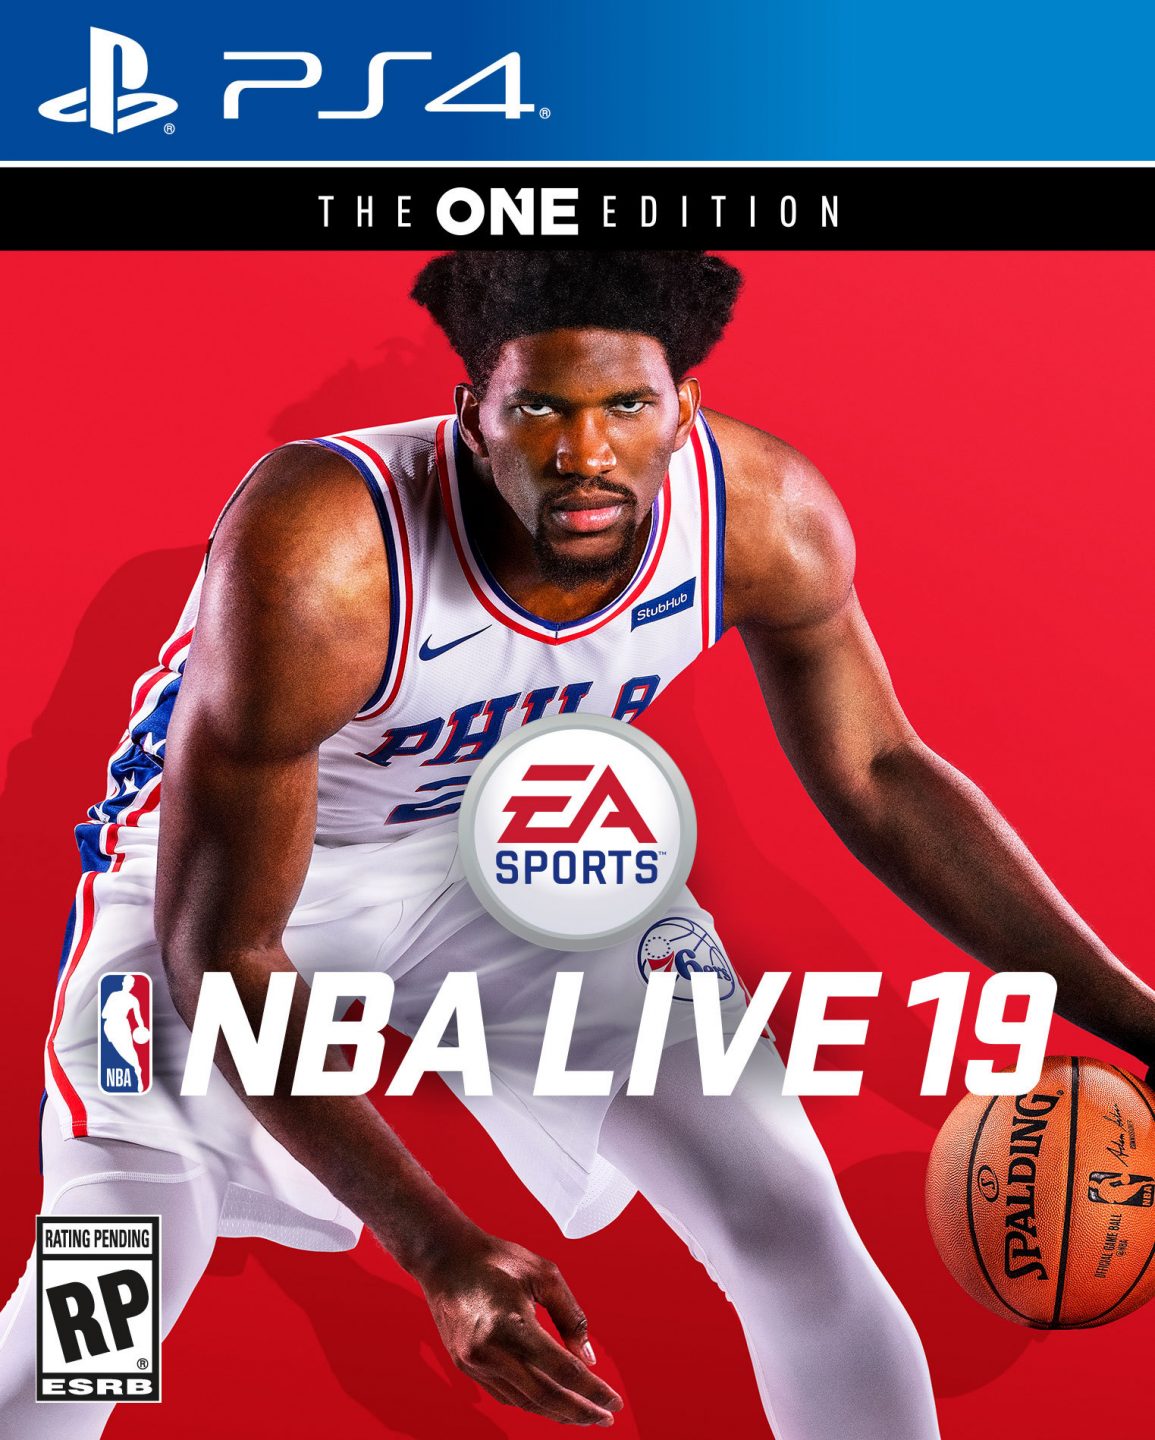 Last night at the NBA Awards, Electronic Arts Inc. (NASDAQ: EA) revealed Joel Embiid as the cover athlete for EA SPORTS™ NBA LIVE 19 , adding to the accolades he has achieved over the past few years. Embiid was the third overall pick of the NBA Draft 2014 presented by State Farm and claimed a spot on the All-Star roster for the first time this season. He also led his team to their first playoff appearance since 2012 while averaging nearly 23 points and 11 rebounds a game. “Joel is a perfect fit to grace the cover of NBA LIVE 19,” said Joshua Rabenovets, Senior Brand Director at EA SPORTS. “He is the voice of the new wave of basketball players and his on-court dominance, creative personality, and love for the fans made him an ideal choice for this year's game.” “It’s great, it’s amazing. I’m thankful for this opportunity, especially as a basketball player,” Embiid said. “You work so hard because you have goals in life, you want to be in the Hall of Fame, but also, being on the cover of a video game is something I’ve always dreamed of and I’m happy to be in this position.” Read the rest of the interview here. NBA LIVE 19 will empower players to build their squad and take on the world, one court at a time. Embiid will be joined by several other prolific ballers that will revealed over the coming weeks, each of which has a special connection to NBA LIVE. Stay tuned for the next reveal in The Streets, coming early July. Players who need even more basketball in their lives can also check out NBA LIVE Mobile, available as free-to-download** on the App Store and Google Play. NBA LIVE 19 is developed by EA Tiburon and will be available worldwide September 7 on Xbox One and PlayStation 4. EA Access members receive an additional 10 percent discount*** when they purchase a digital version of NBA LIVE 19, on Xbox Live. Subscribers can also enjoy up to 10 hours of play time as part of the Play First Trial on August 31st.